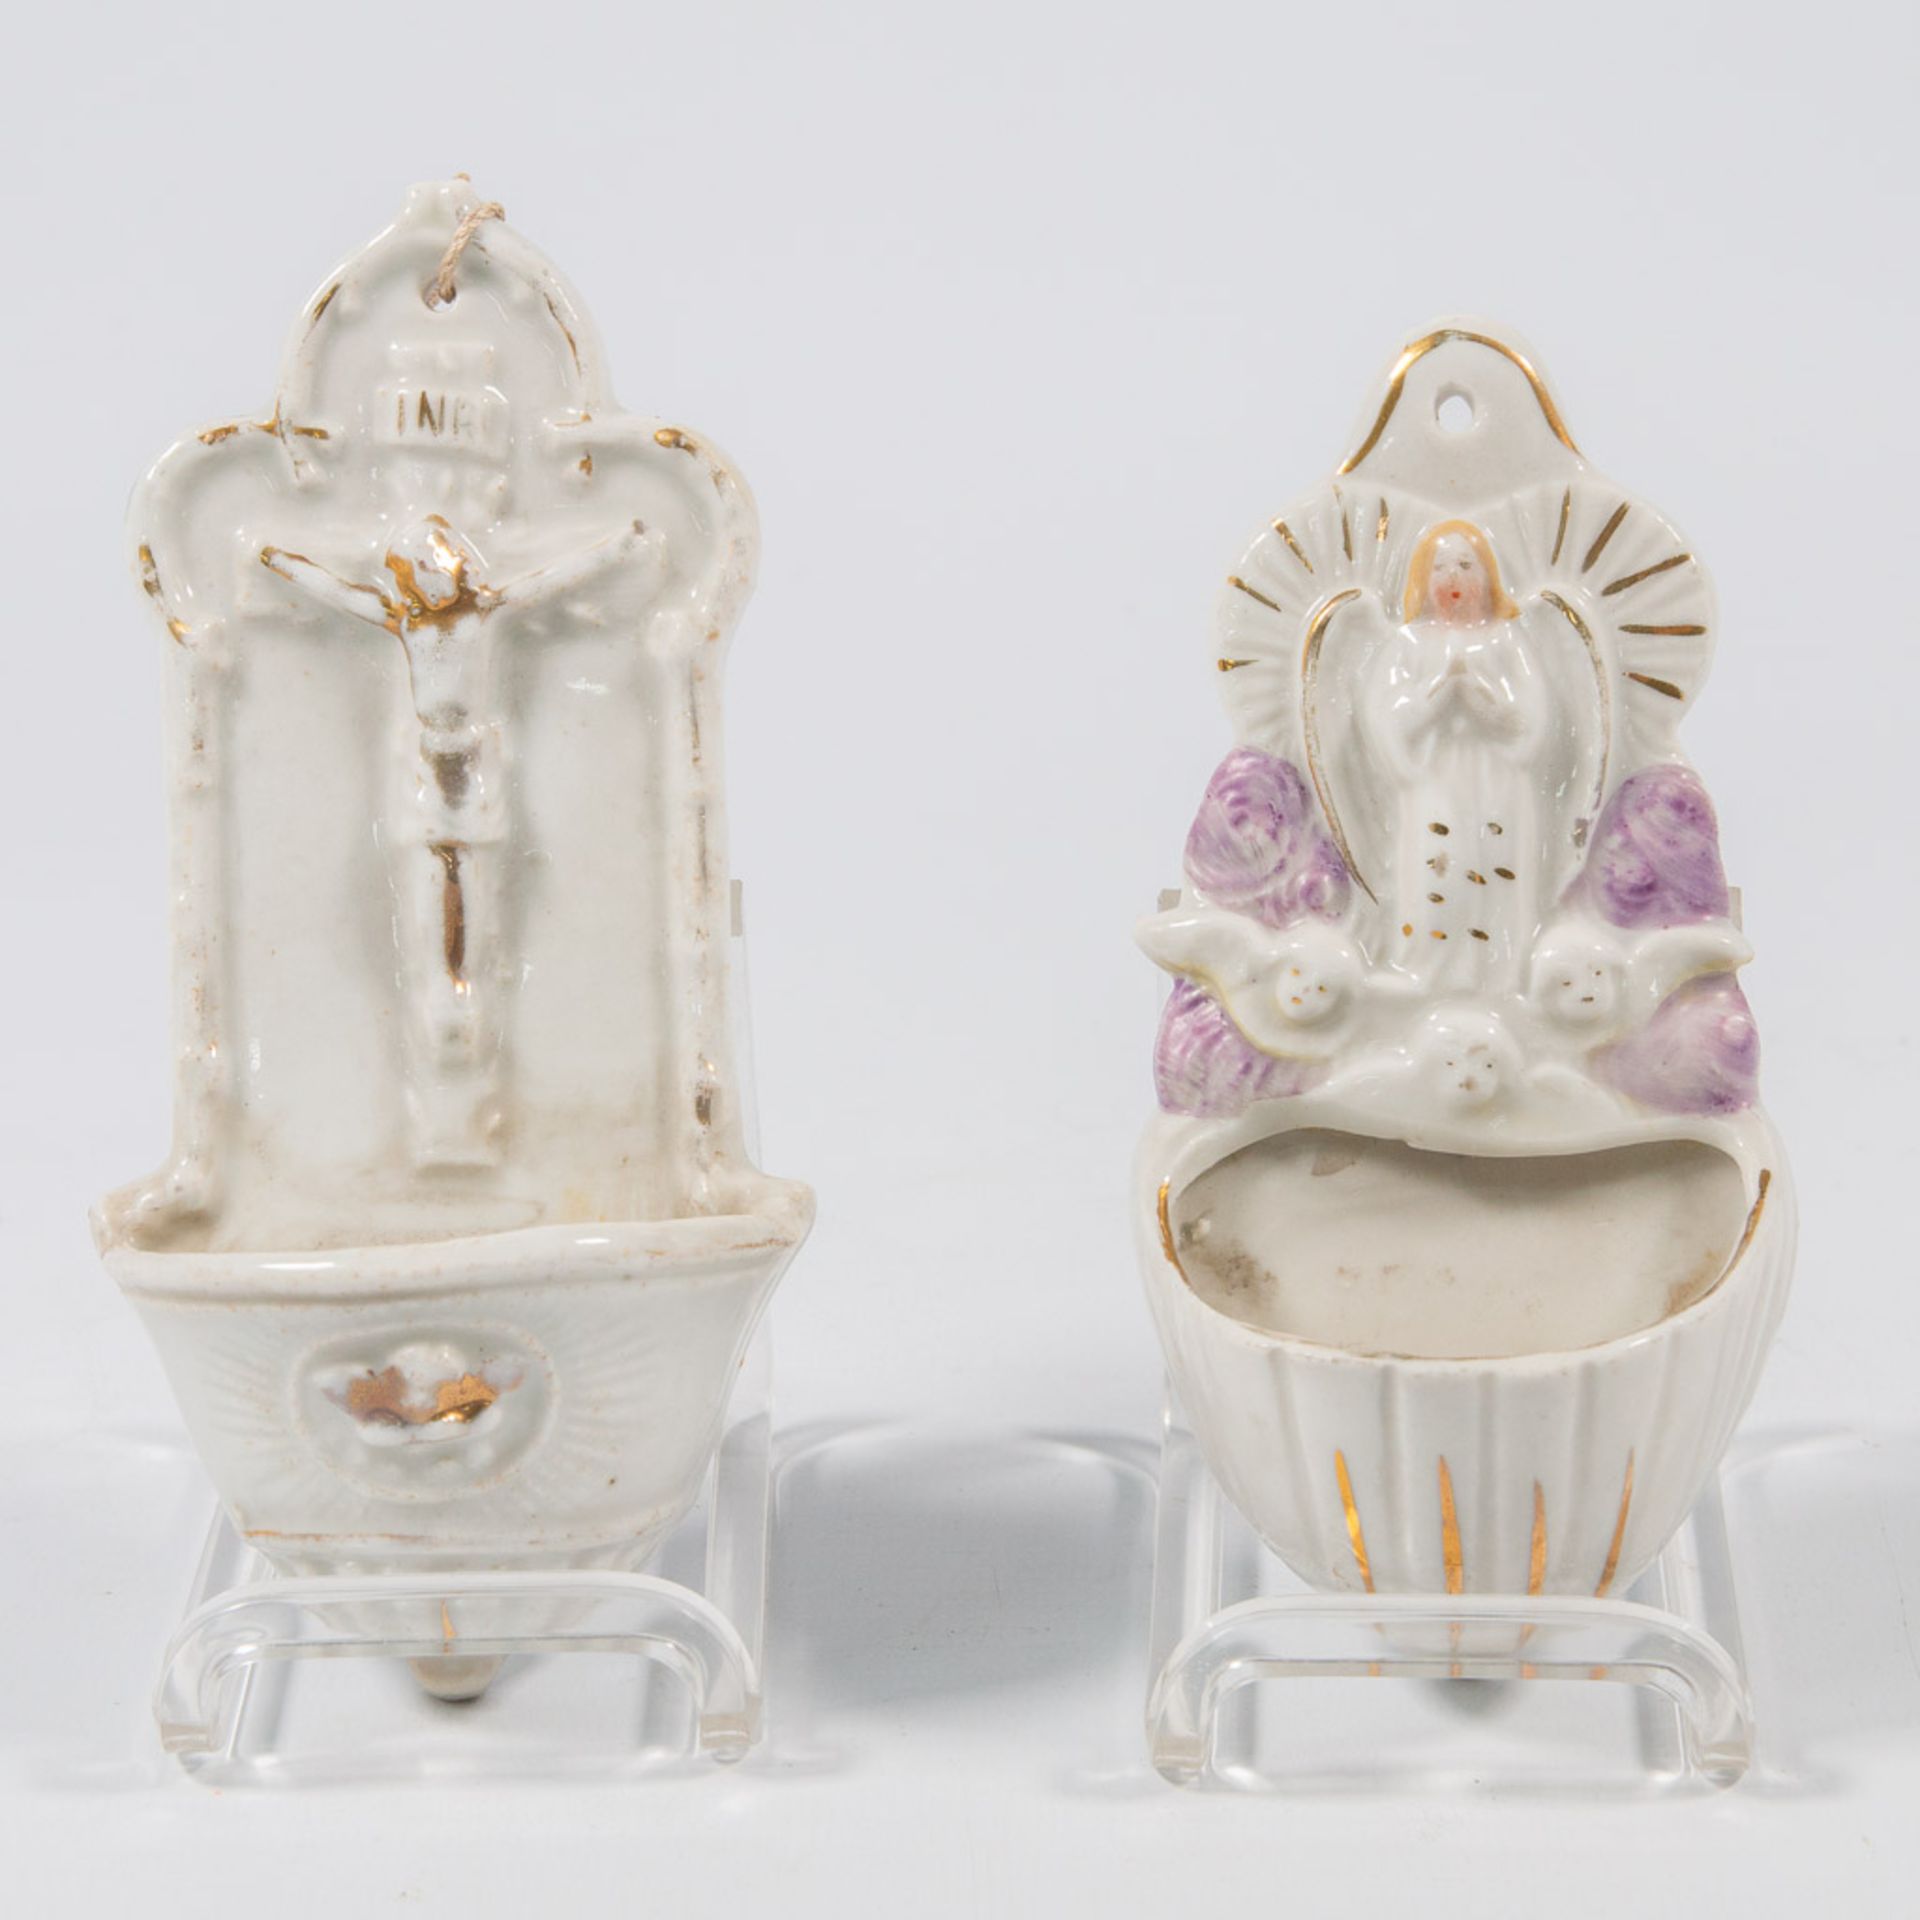 A collection of 11 bisque porcelain holy statues, Mary, Joseph, and Madonna. - Image 16 of 49